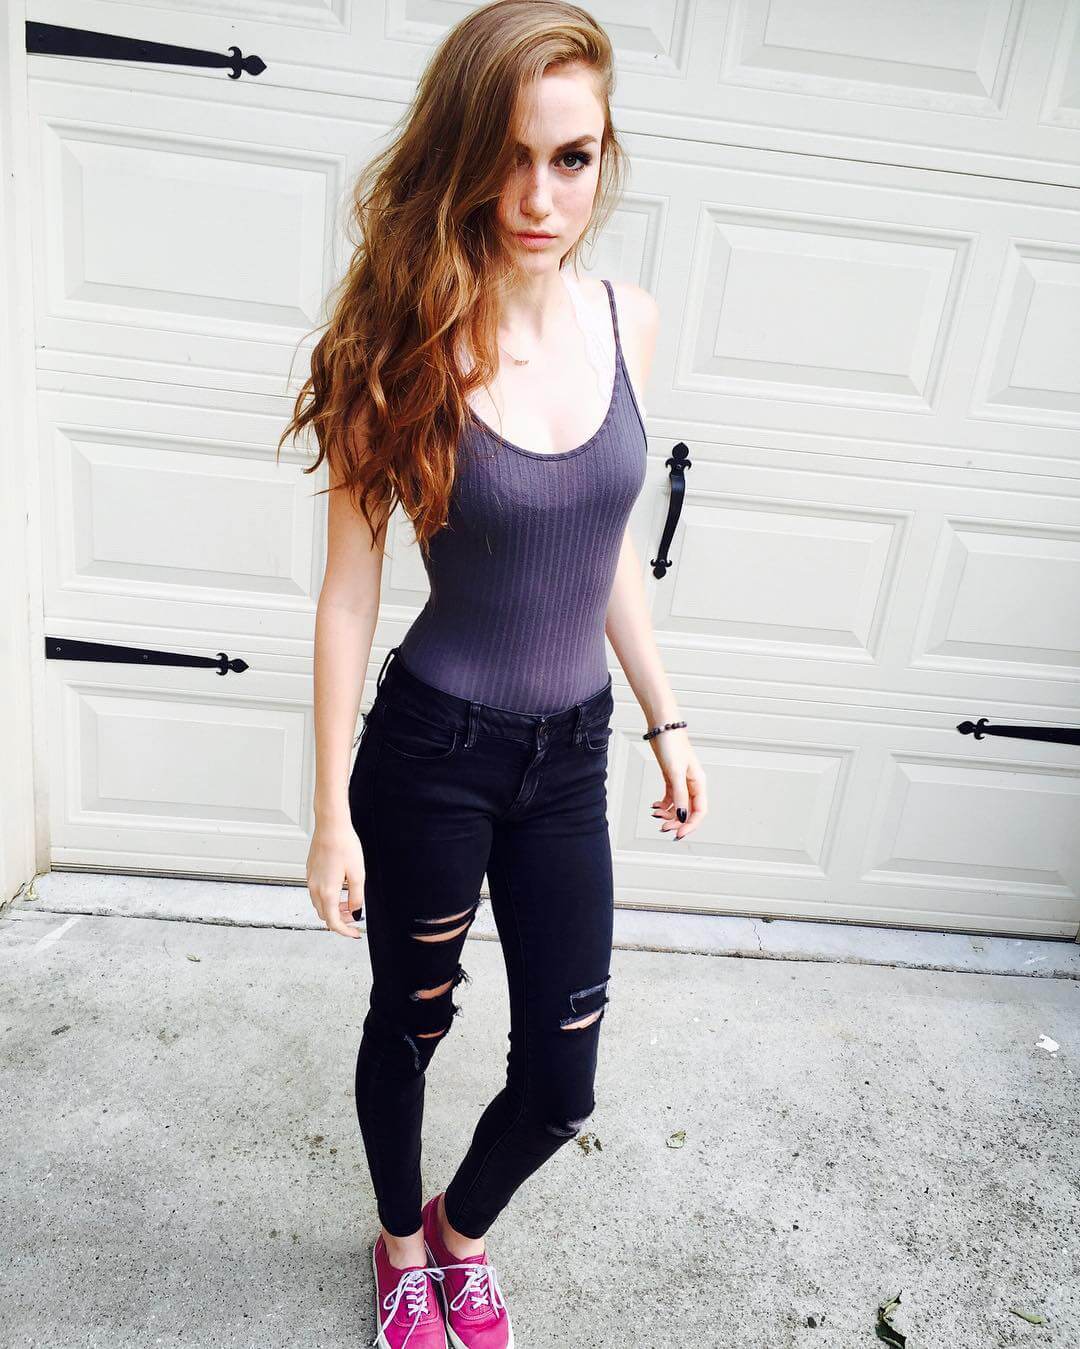 55+ Hot Pictures Of Madison Lintz Are Just Too Majestically Sexy | Best Of Comic Books